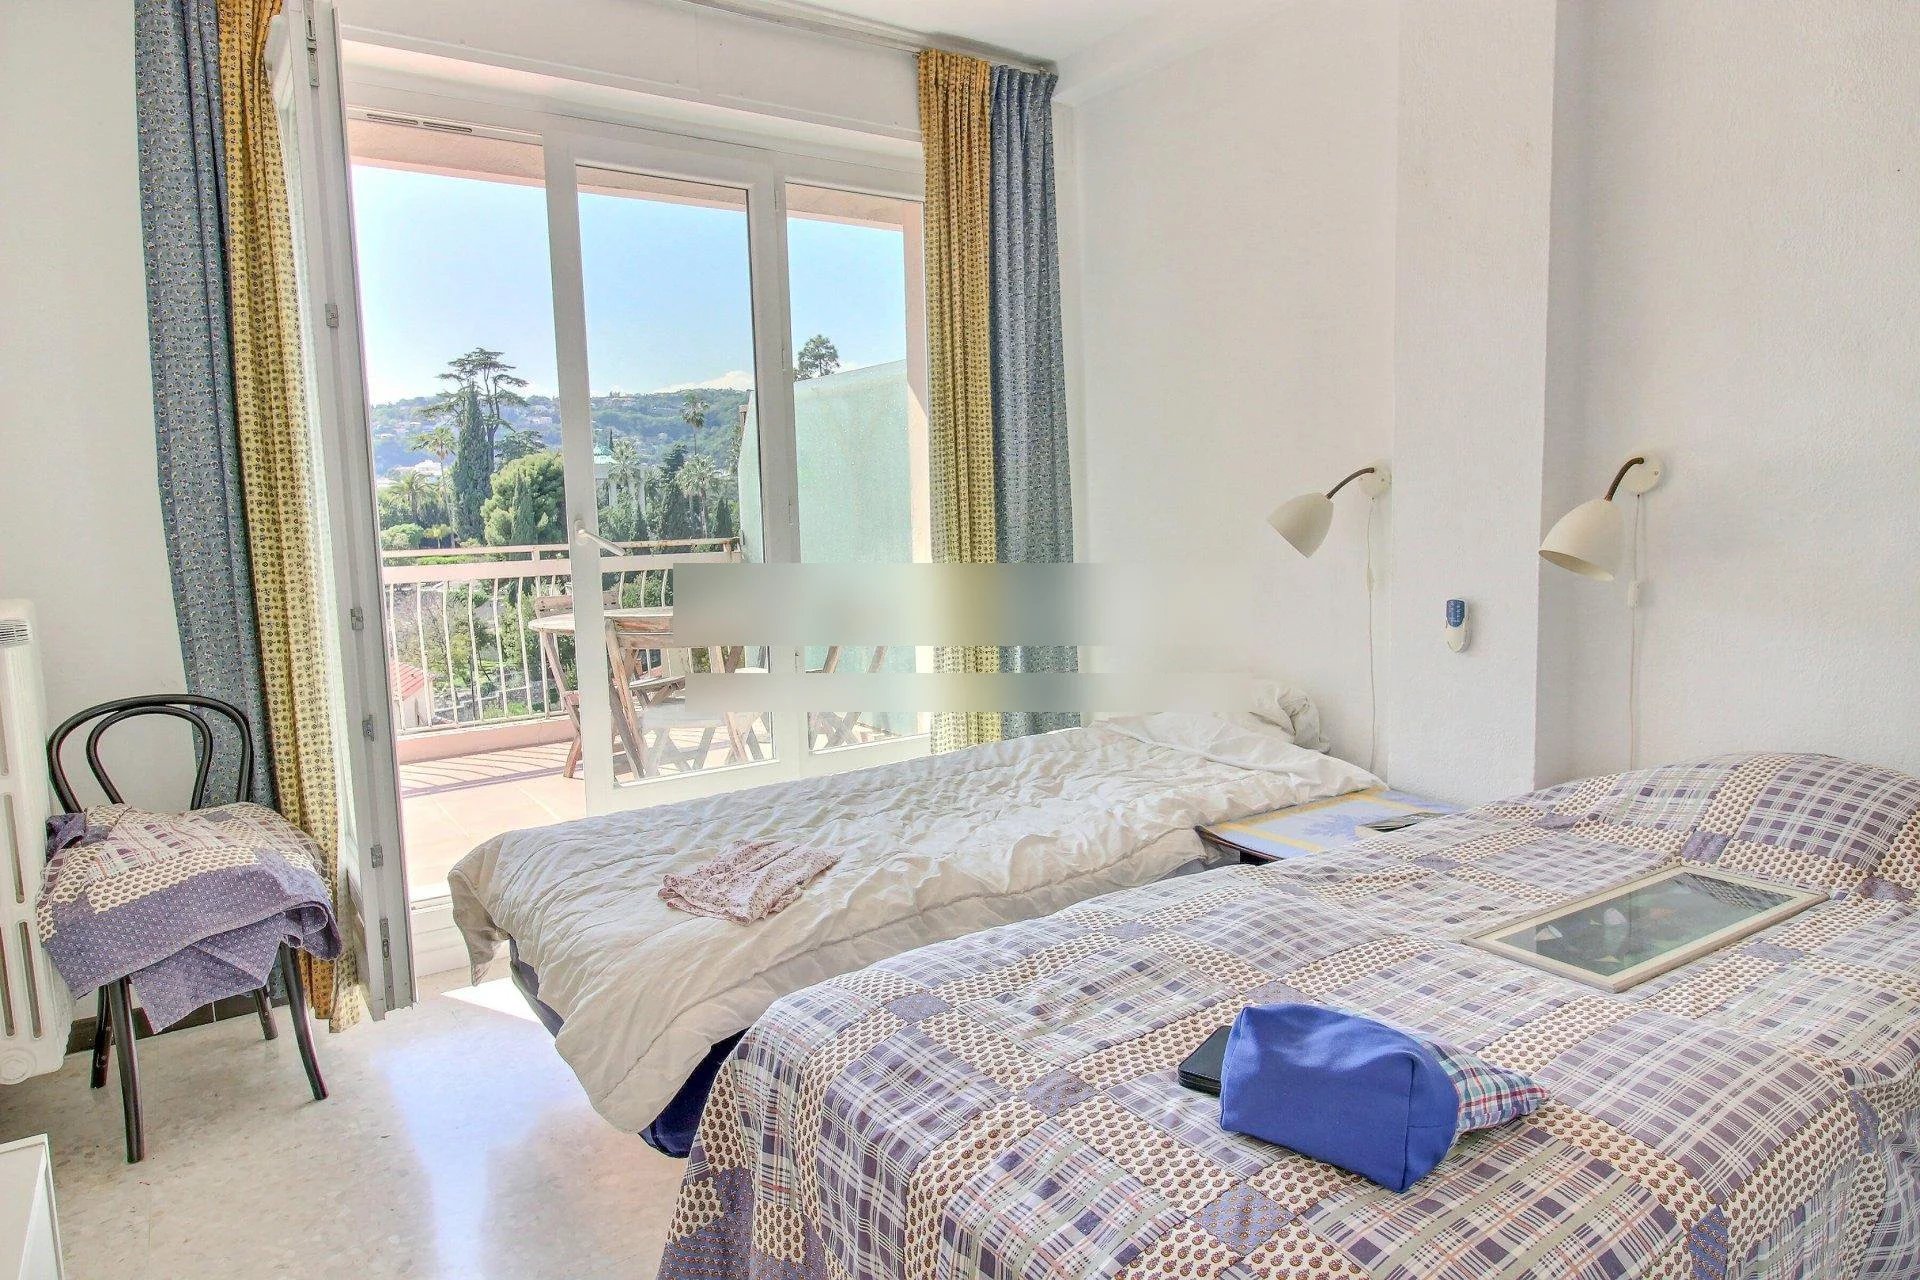 1-bedroom apartment with terrace and small sea view